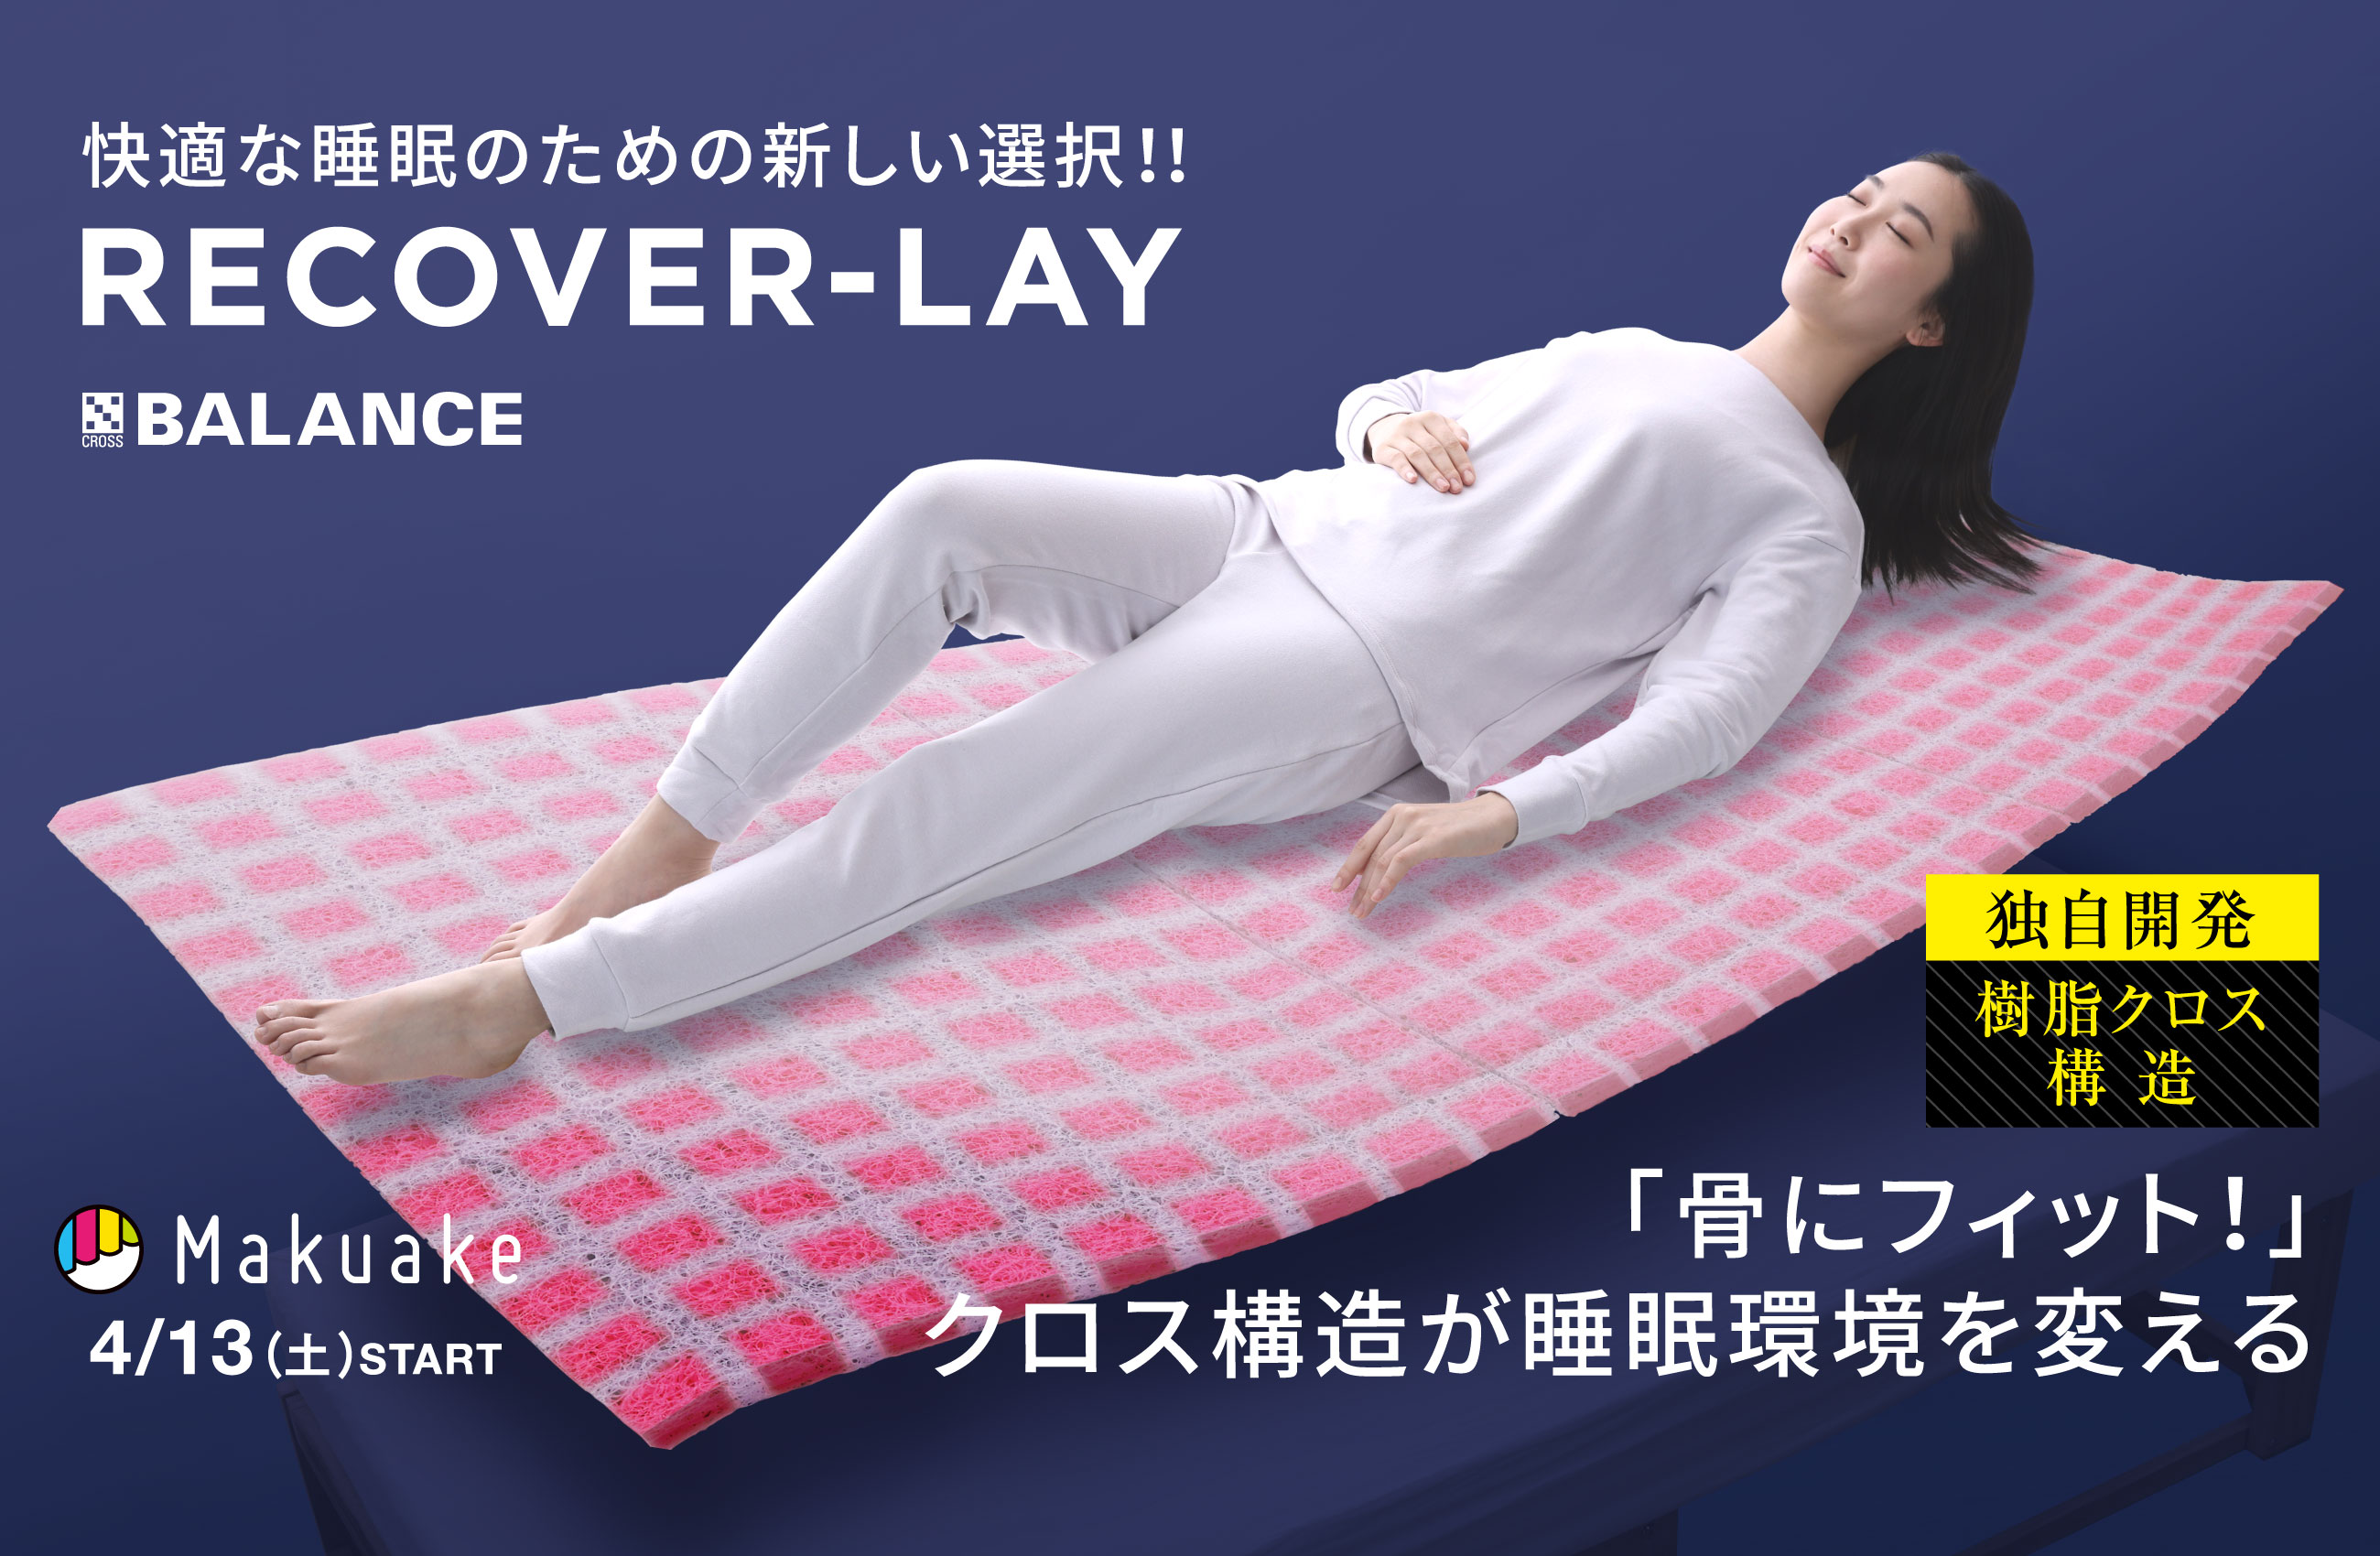 RECOVER-LAY